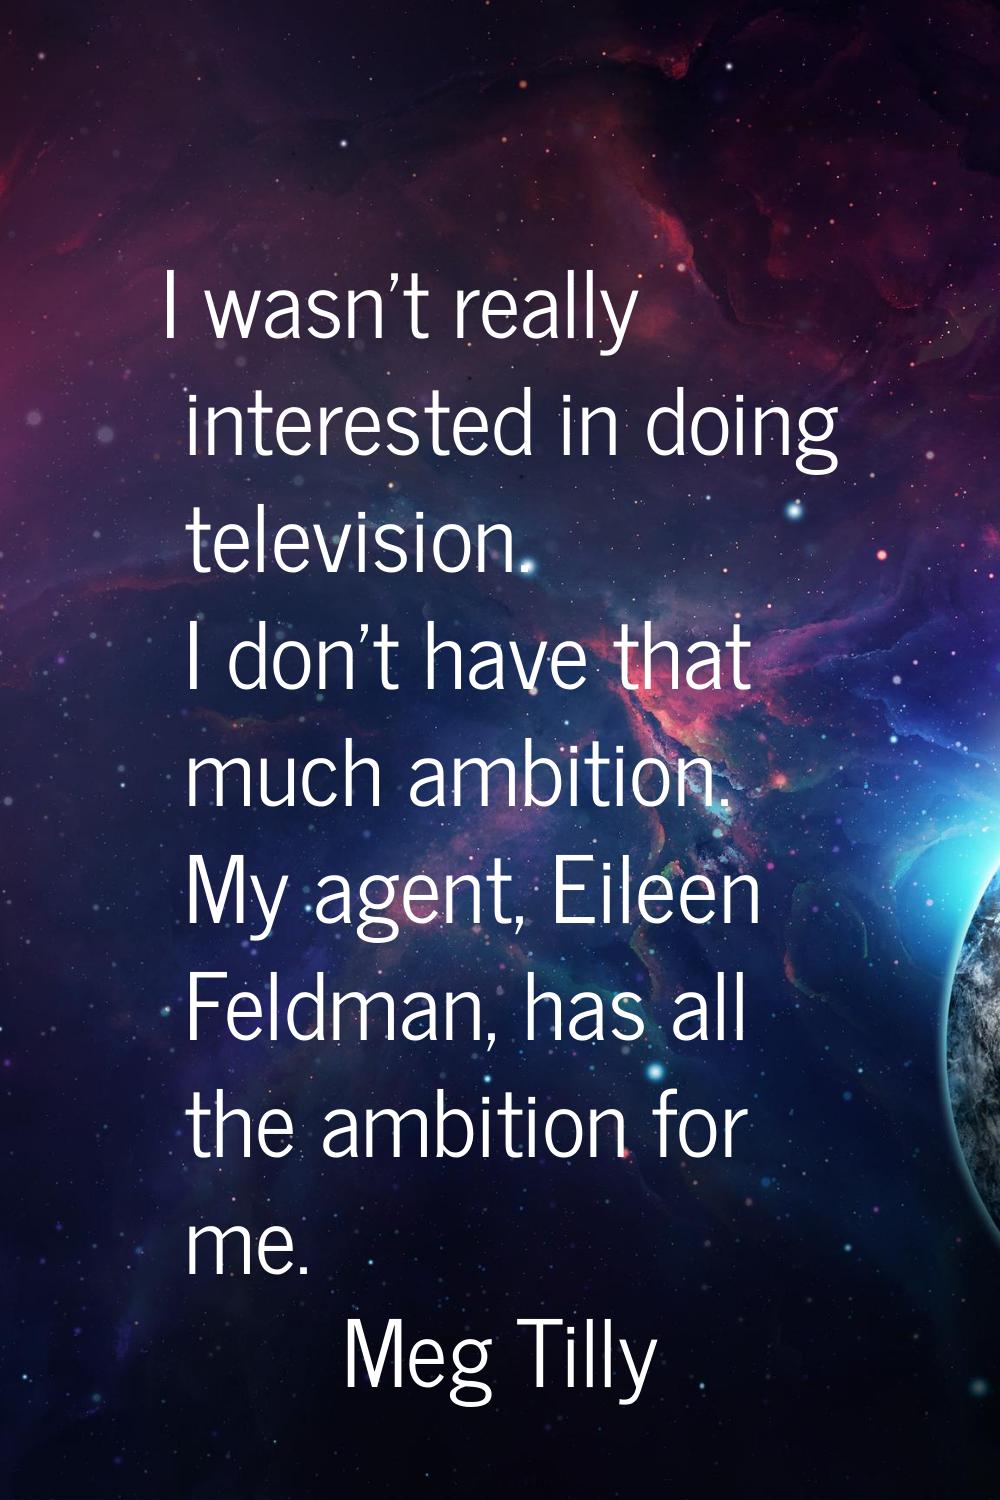 I wasn't really interested in doing television. I don't have that much ambition. My agent, Eileen F